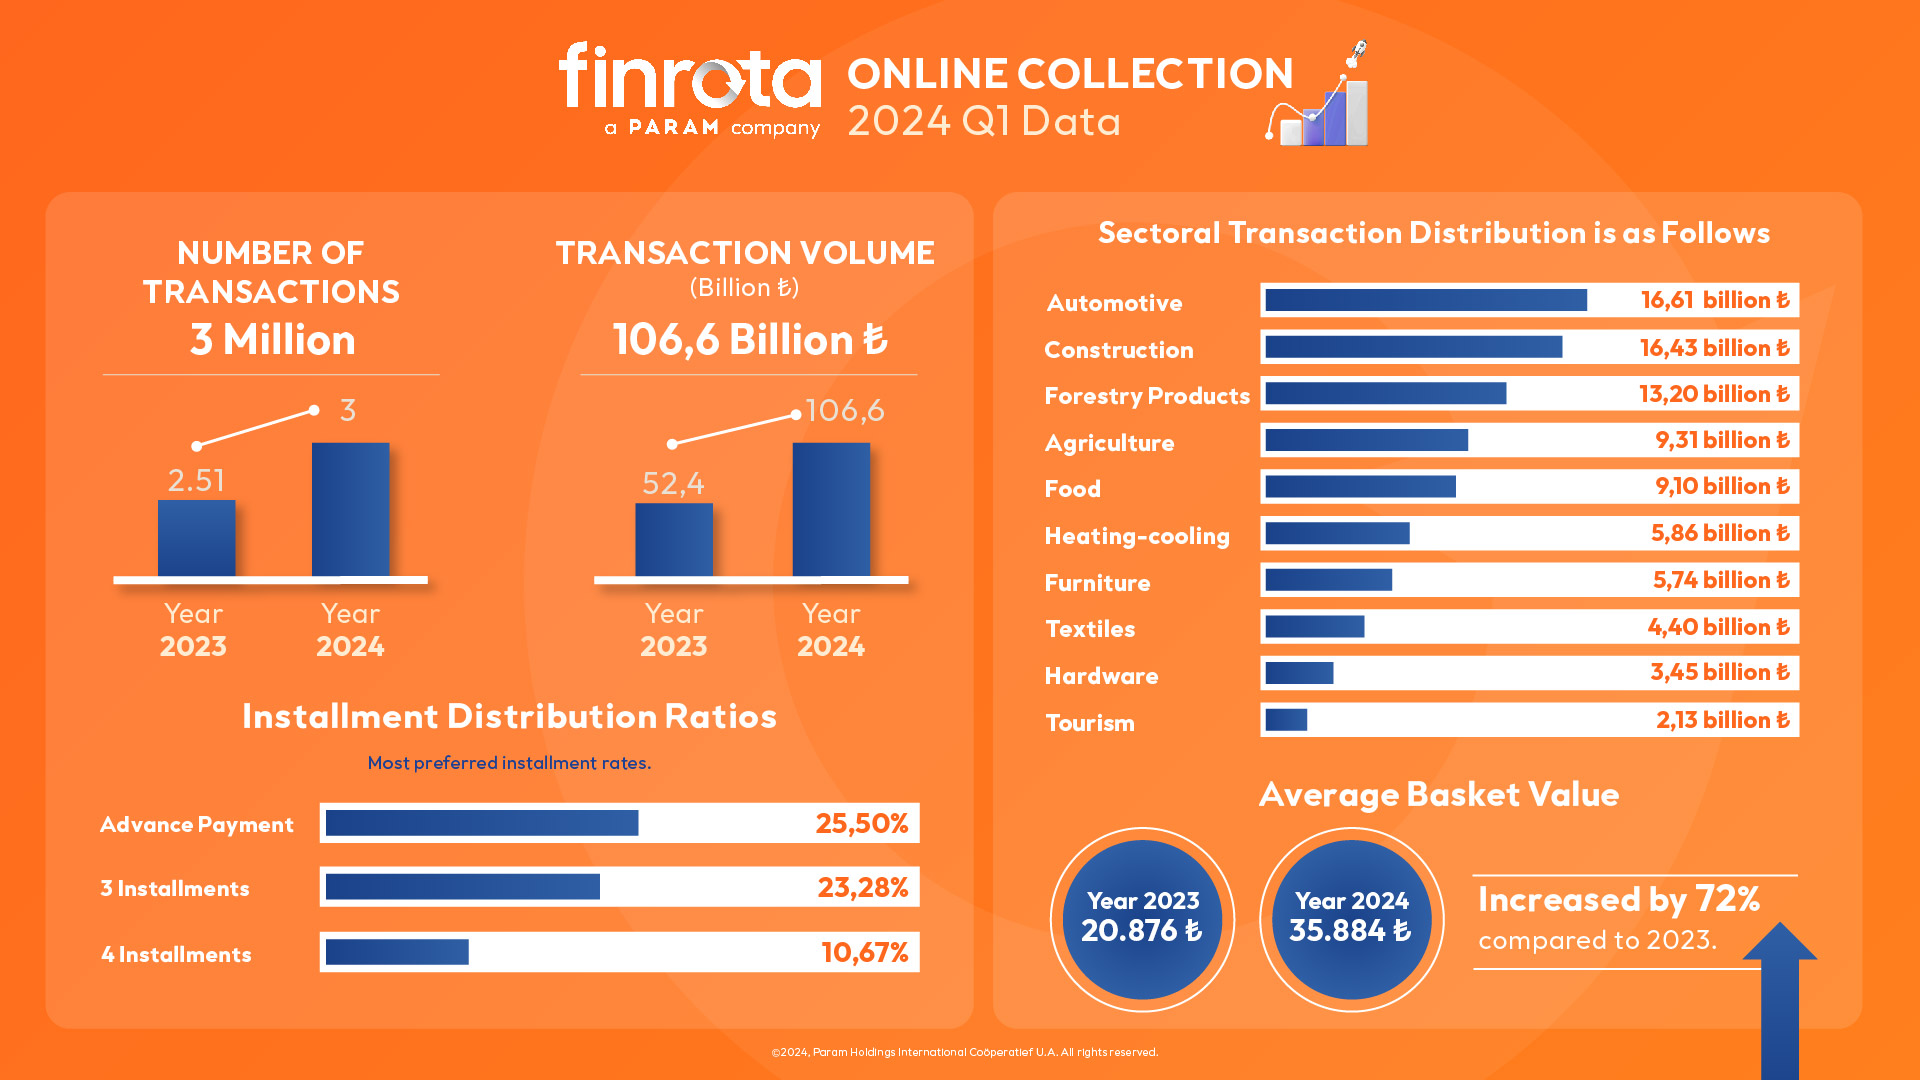 With Netahsilat, 3 million transactions and 106.6 billion TL were collected in the first quarter of 2024.